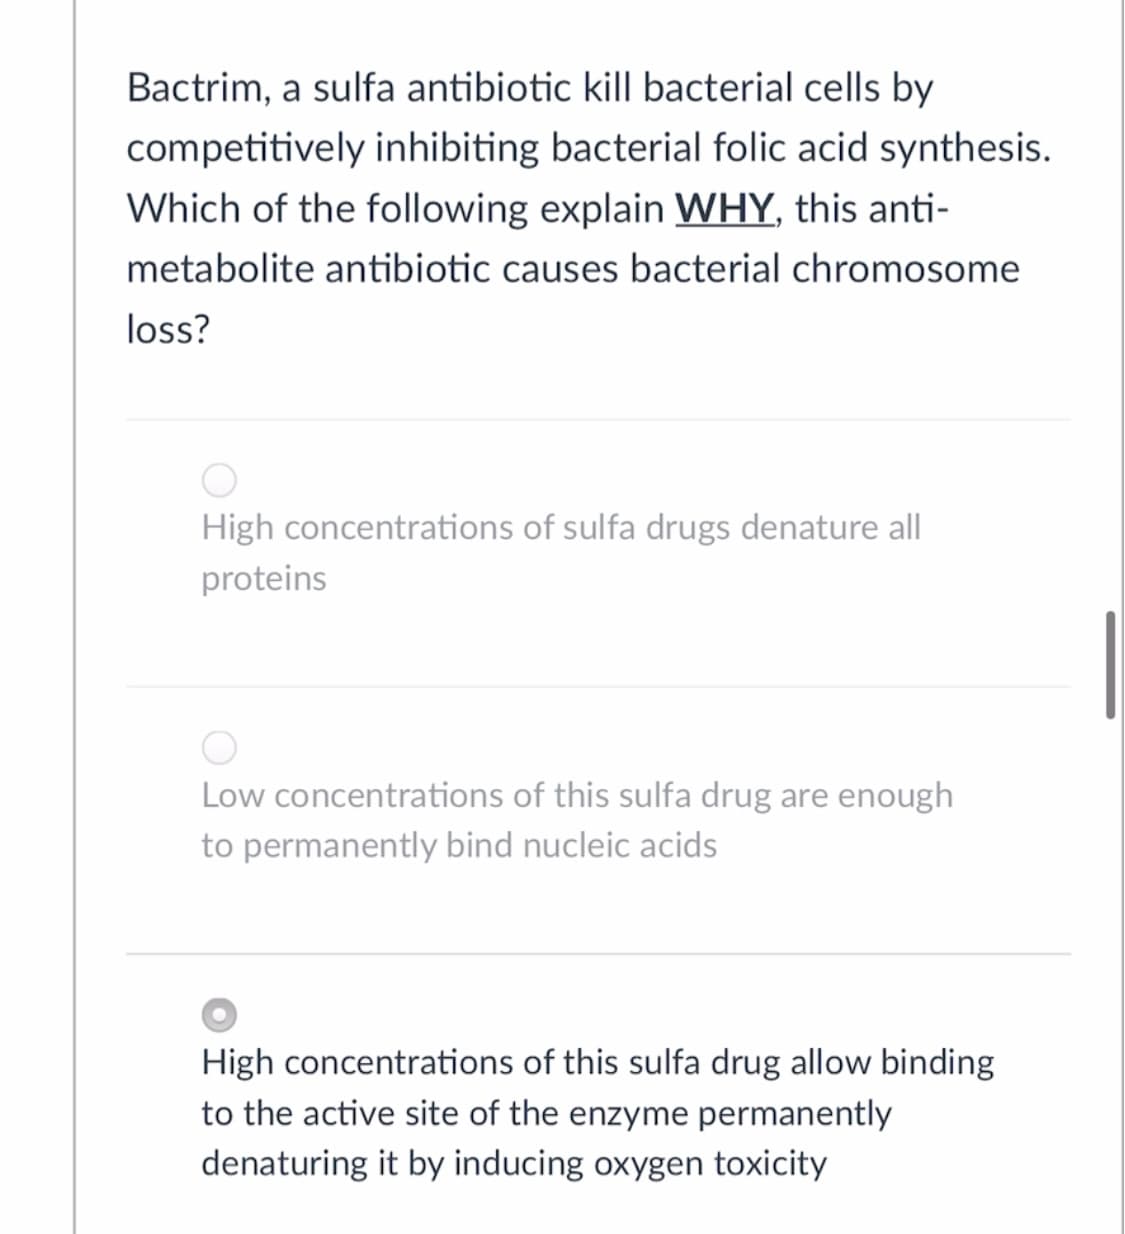 Bactrim, a sulfa antibiotic kill bacterial cells by
competitively inhibiting bacterial folic acid synthesis.
Which of the following explain WHY, this anti-
metabolite antibiotic causes bacterial chromosome
loss?
High concentrations of sulfa drugs denature all
proteins
Low concentrations of this sulfa drug are enough
to permanently bind nucleic acids
High concentrations of this sulfa drug allow binding
to the active site of the enzyme permanently
denaturing it by inducing oxygen toxicity
